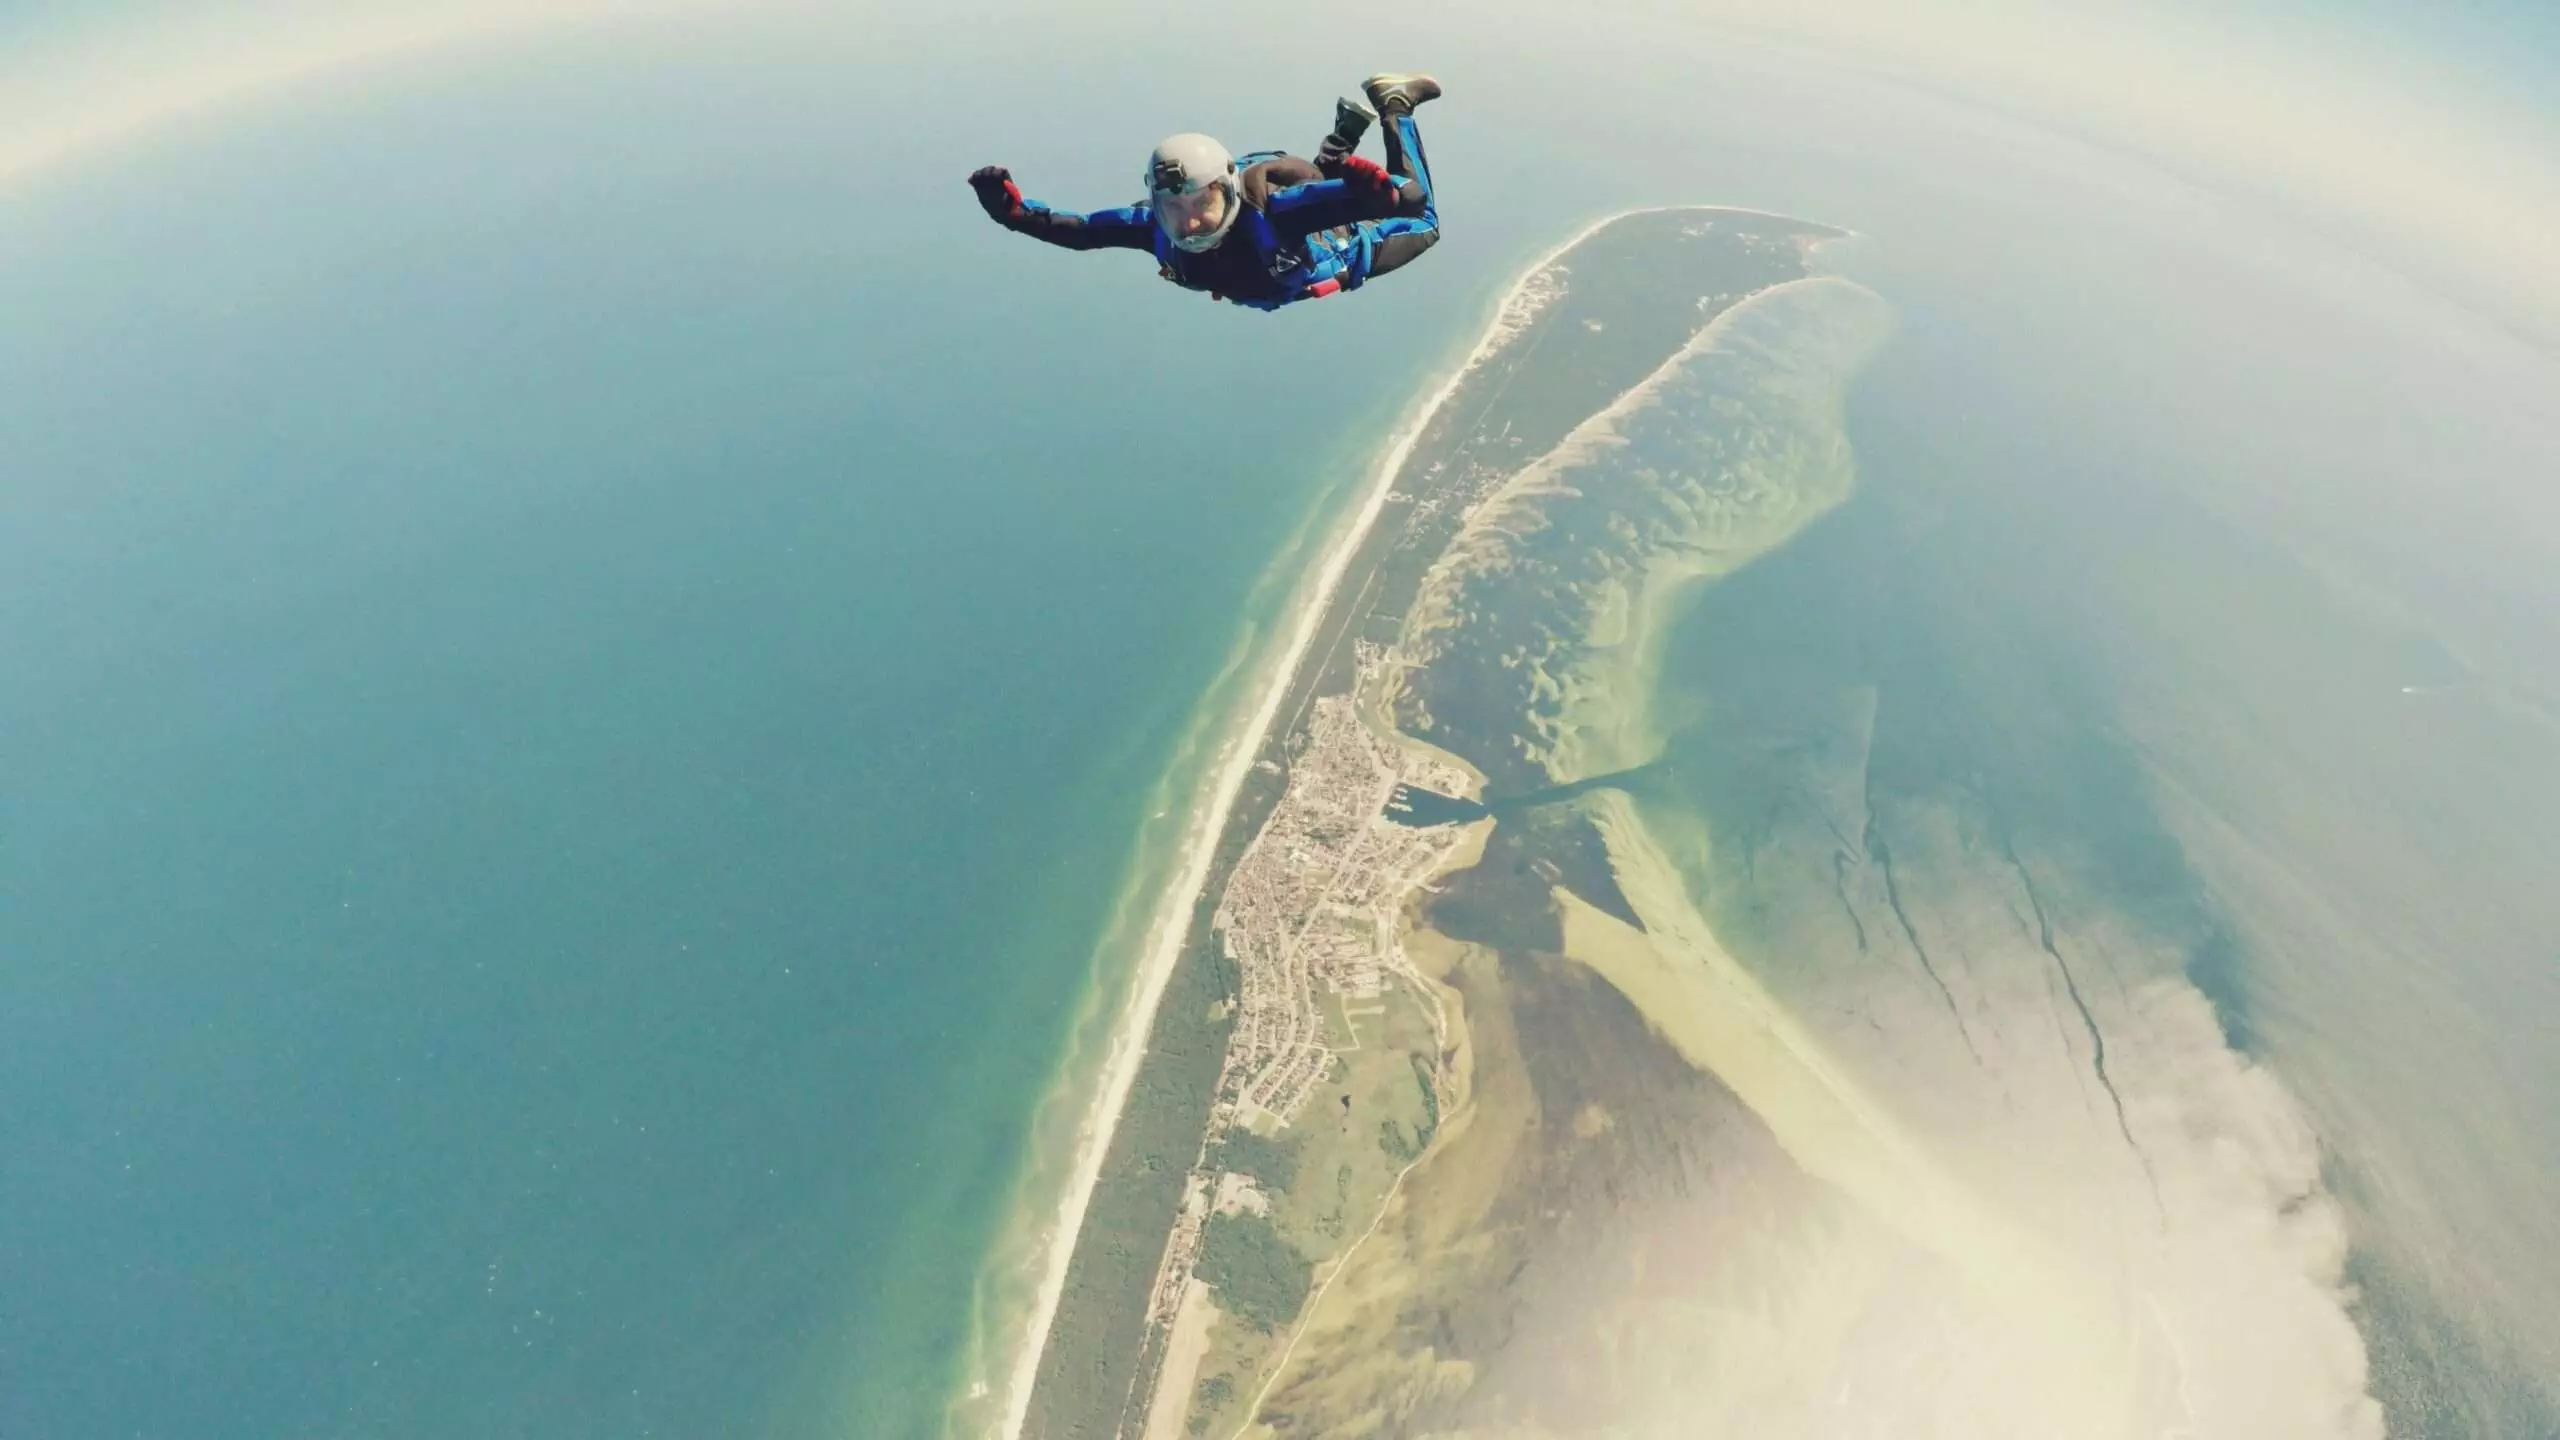 Skydiving in Vancouver? - 5 Things You Should Know! 6